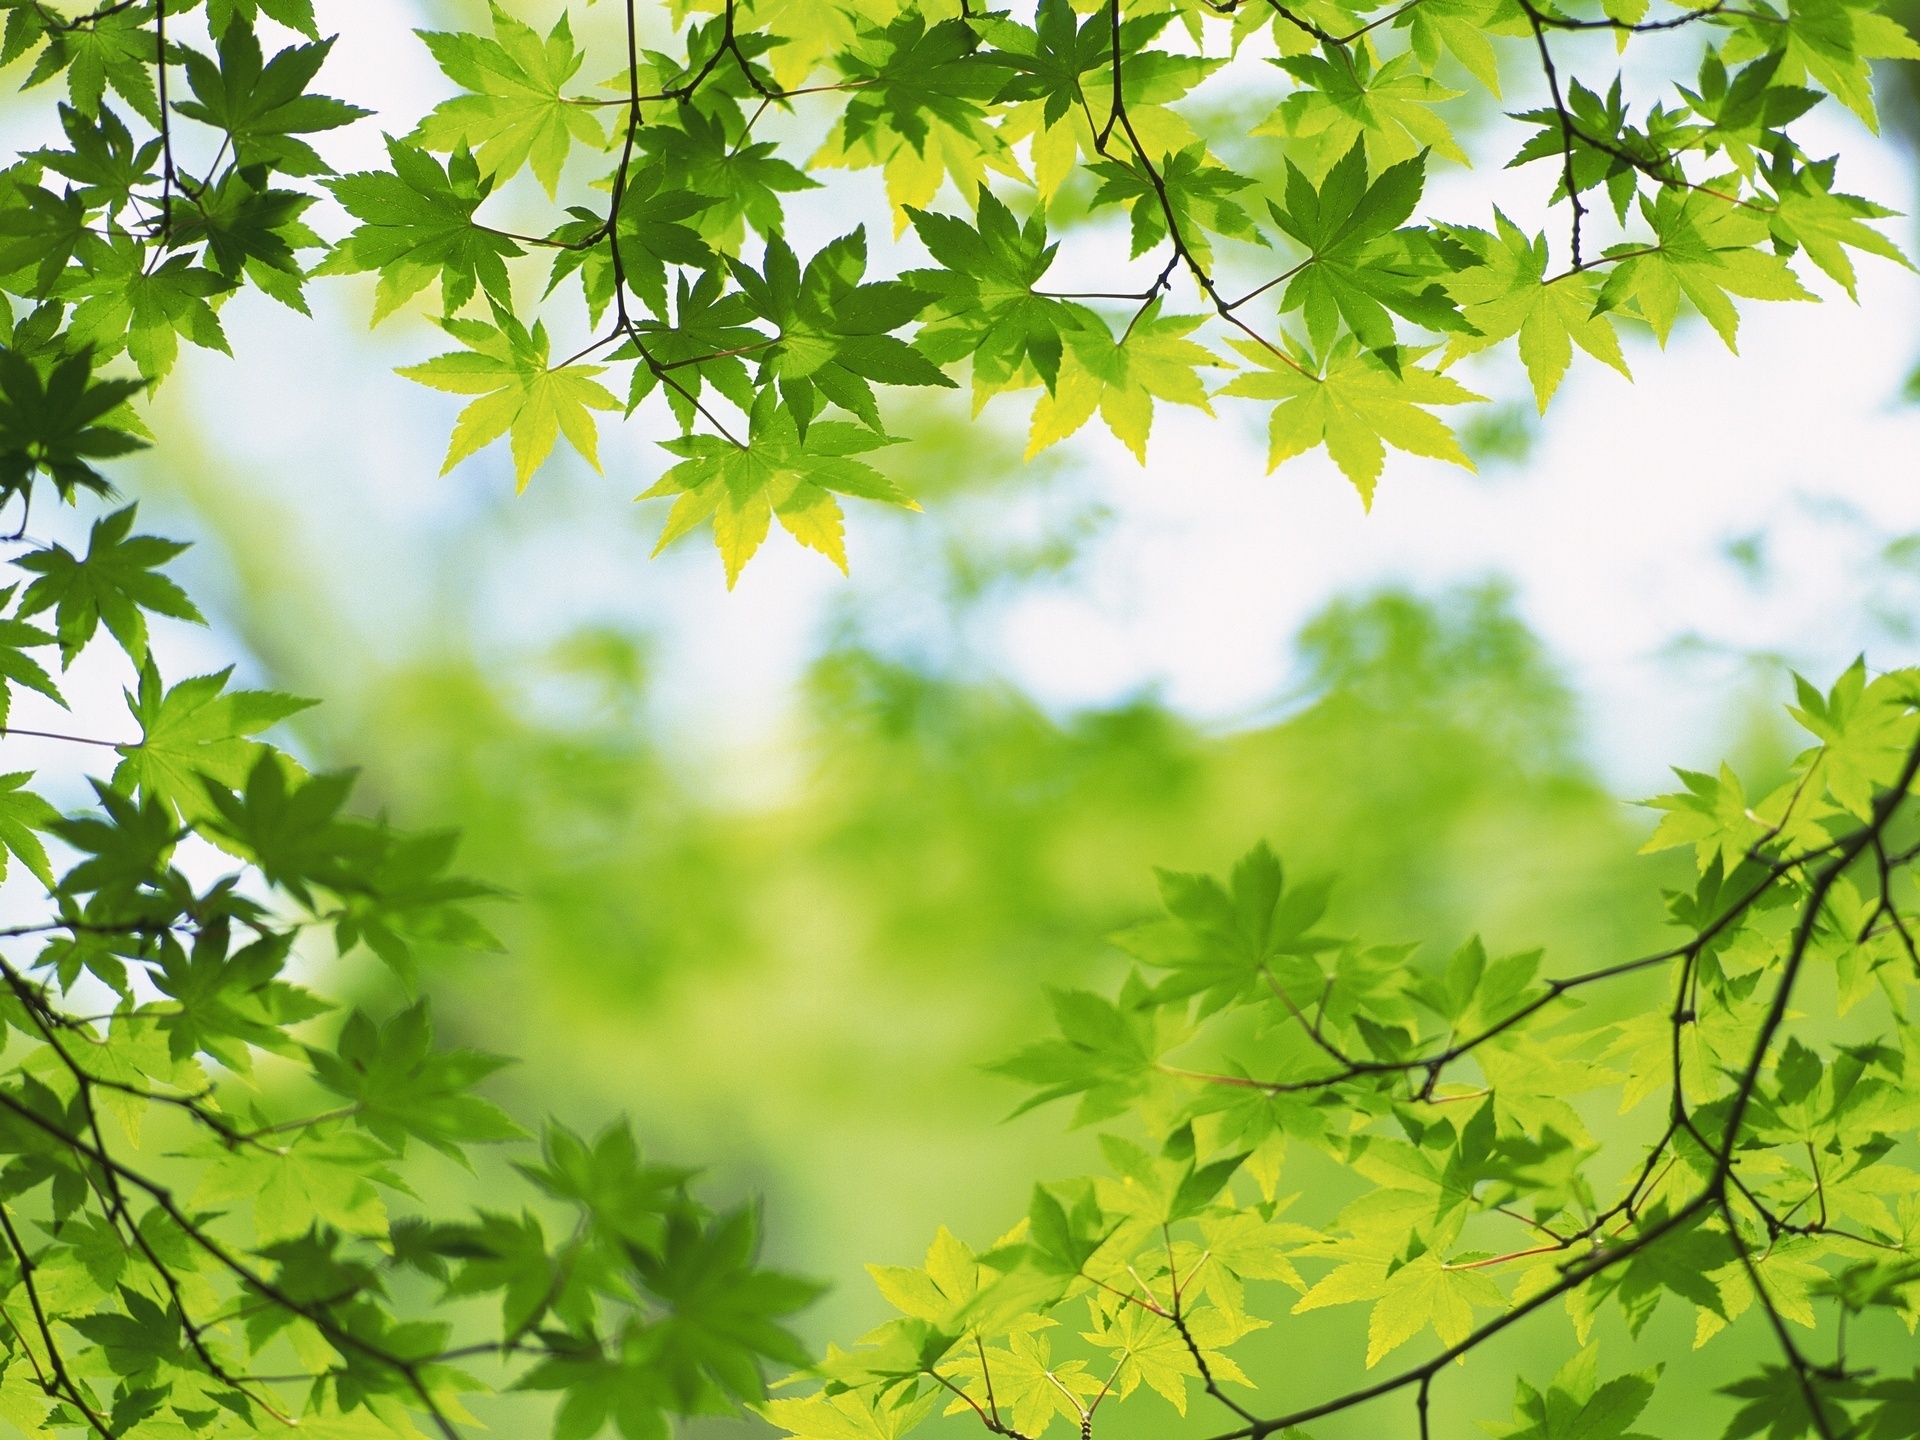 Green images Green leaves HD wallpaper and background photos 22176085